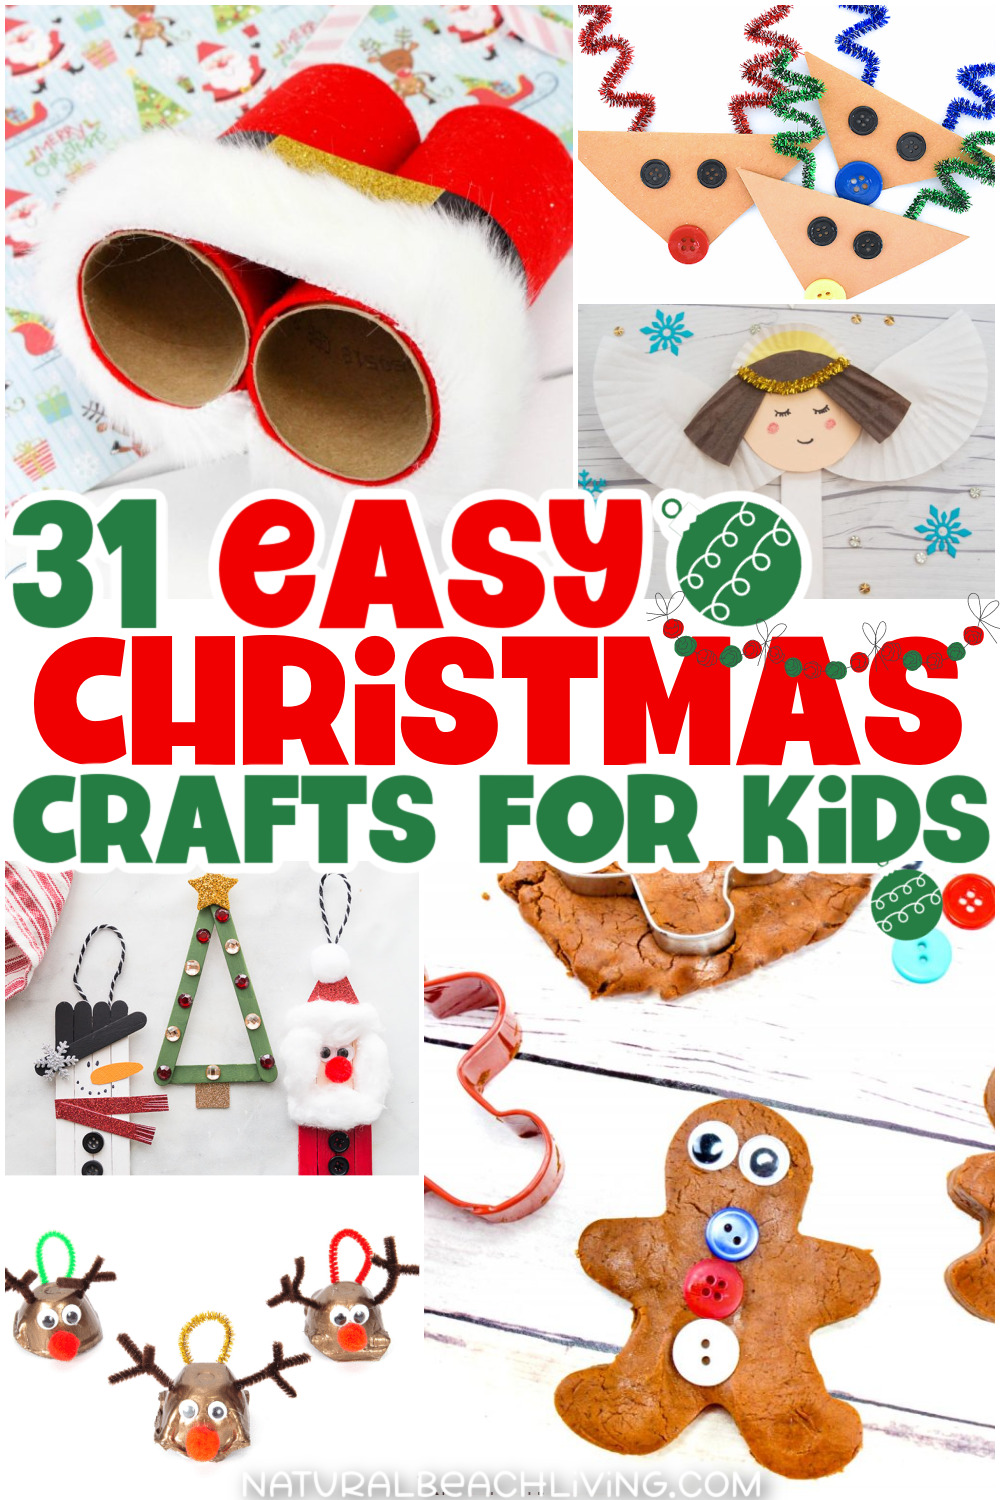 31+ Easy Christmas Crafts for Kids